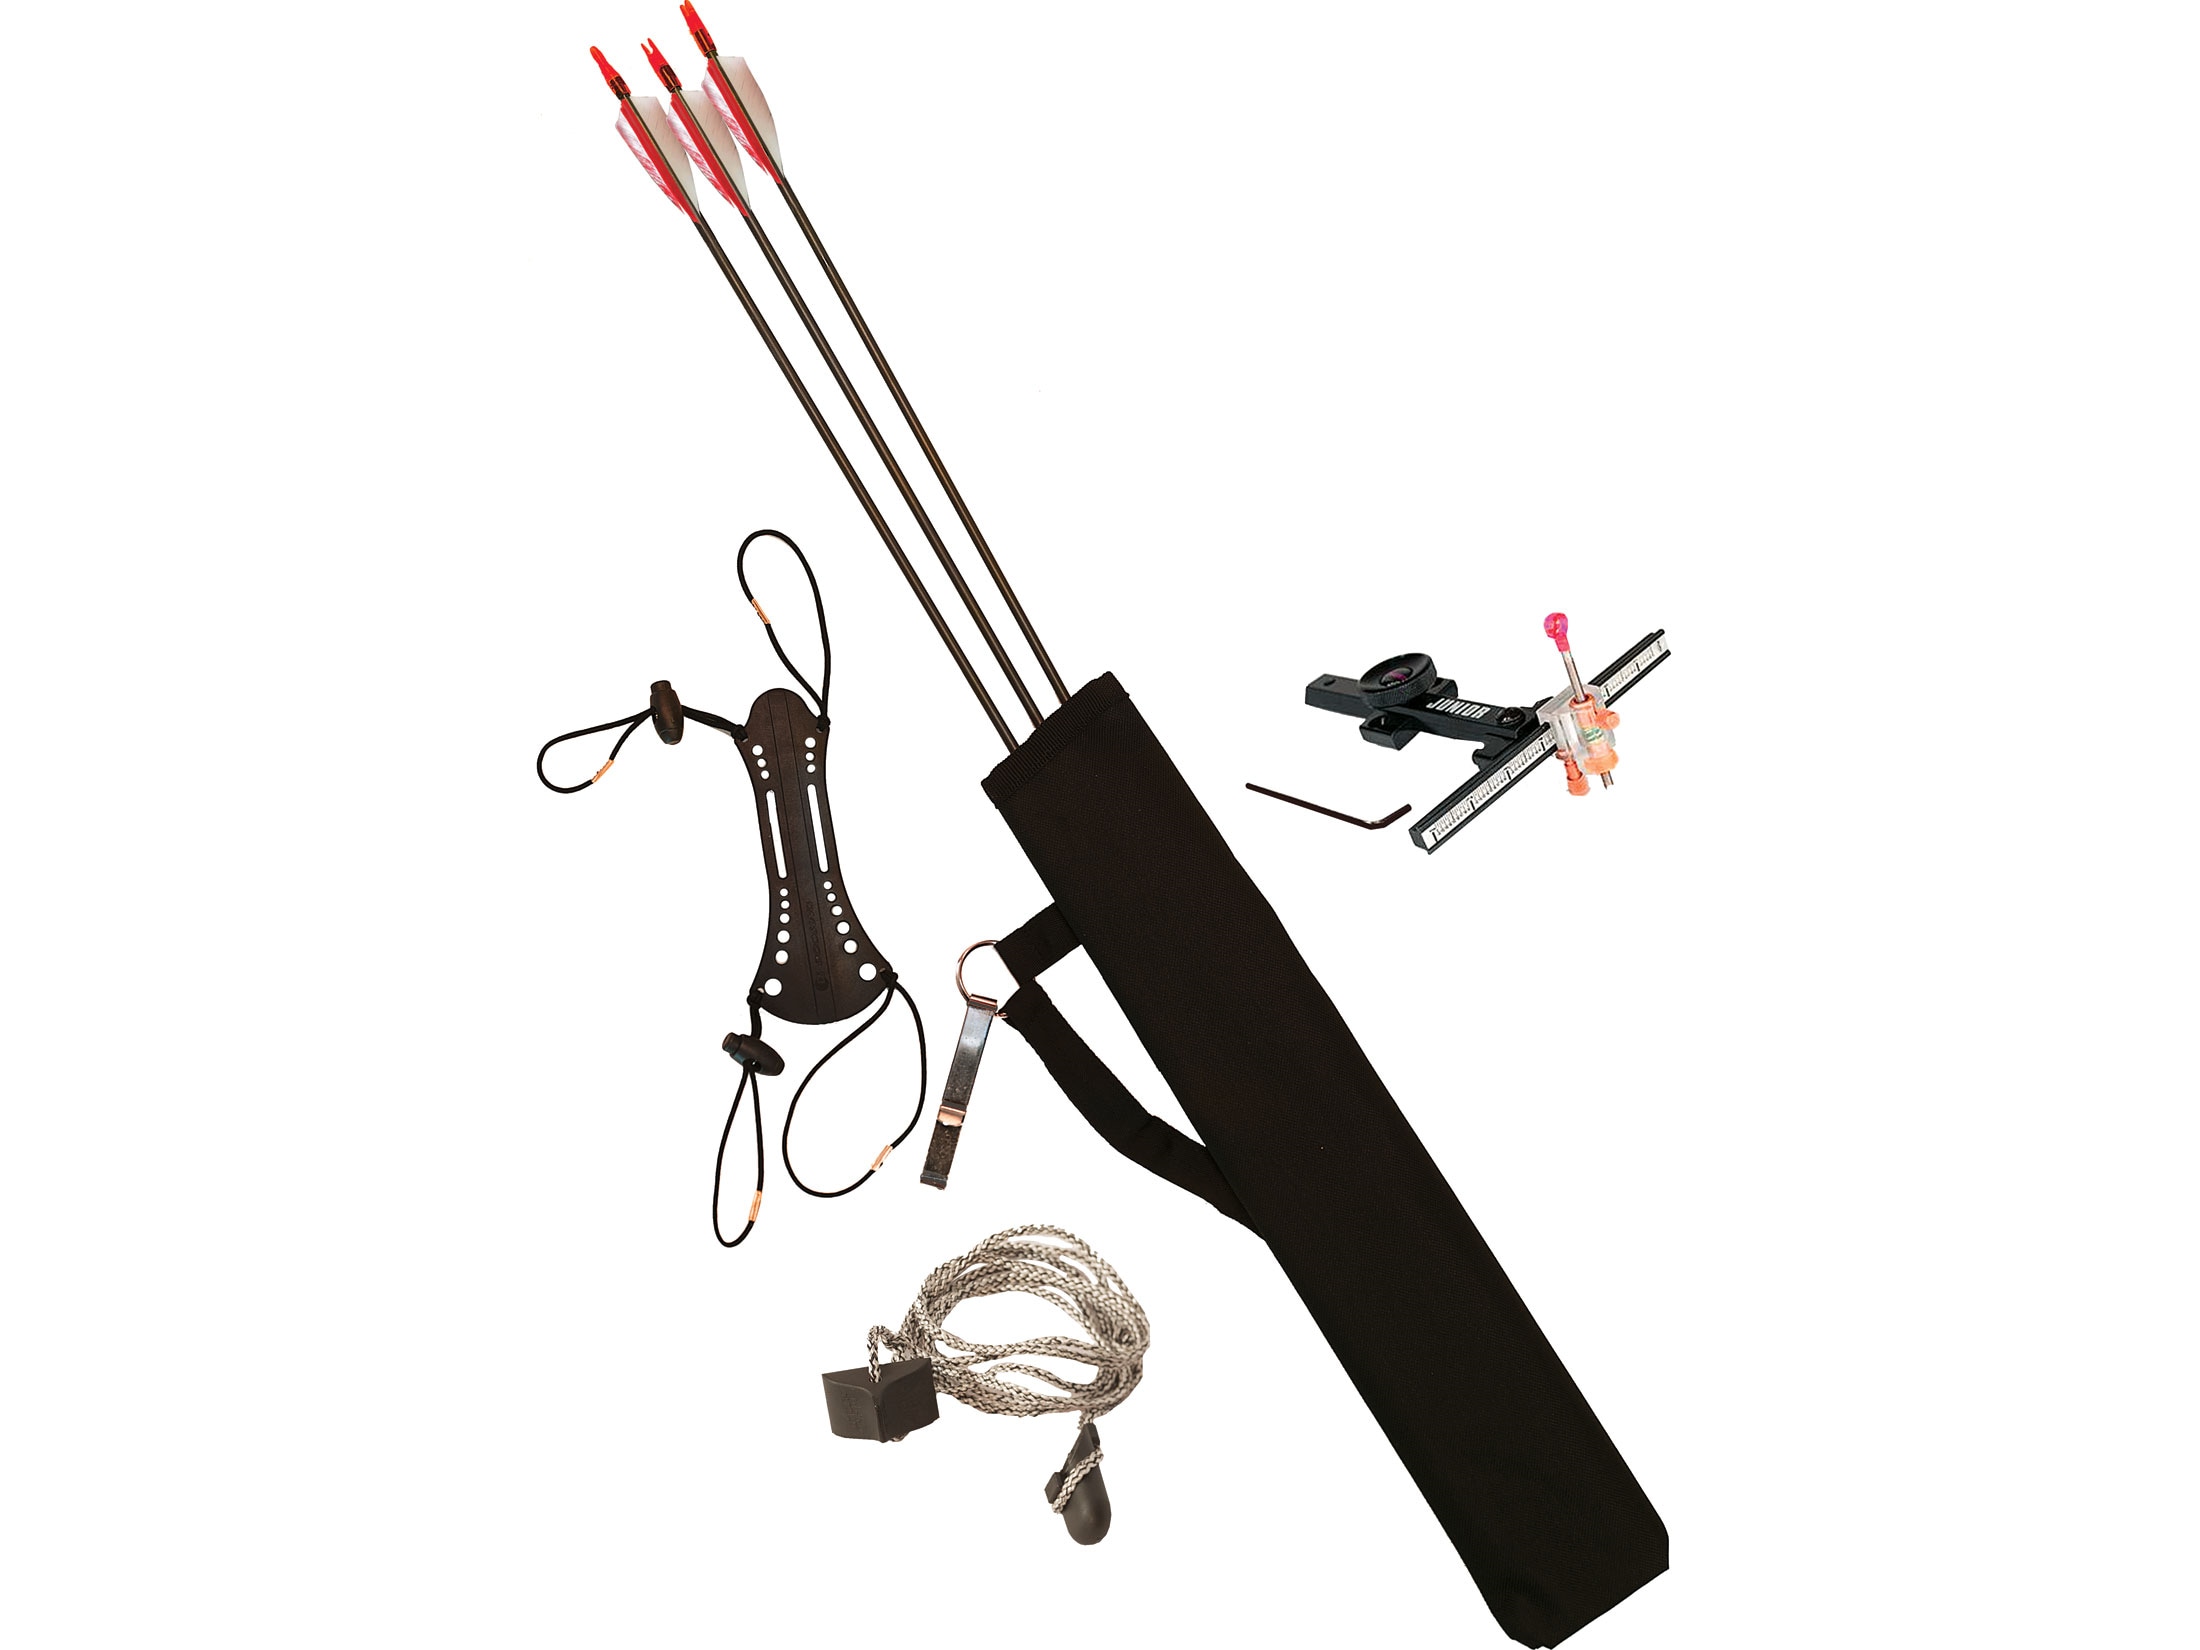 PSE Pro Max Takedown Recurve Bow Package For Sale